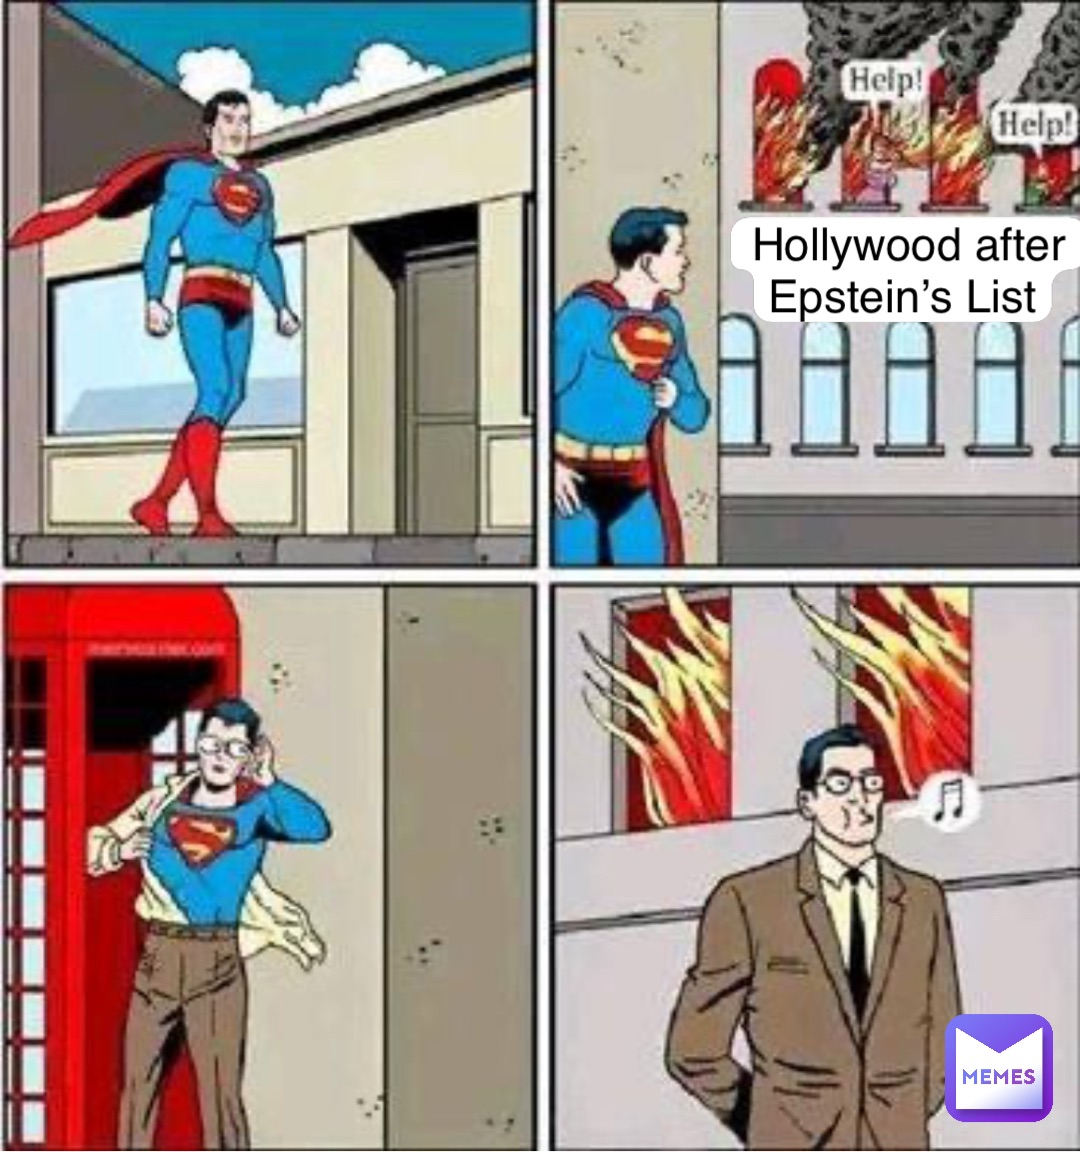 Hollywood after Epstein’s List